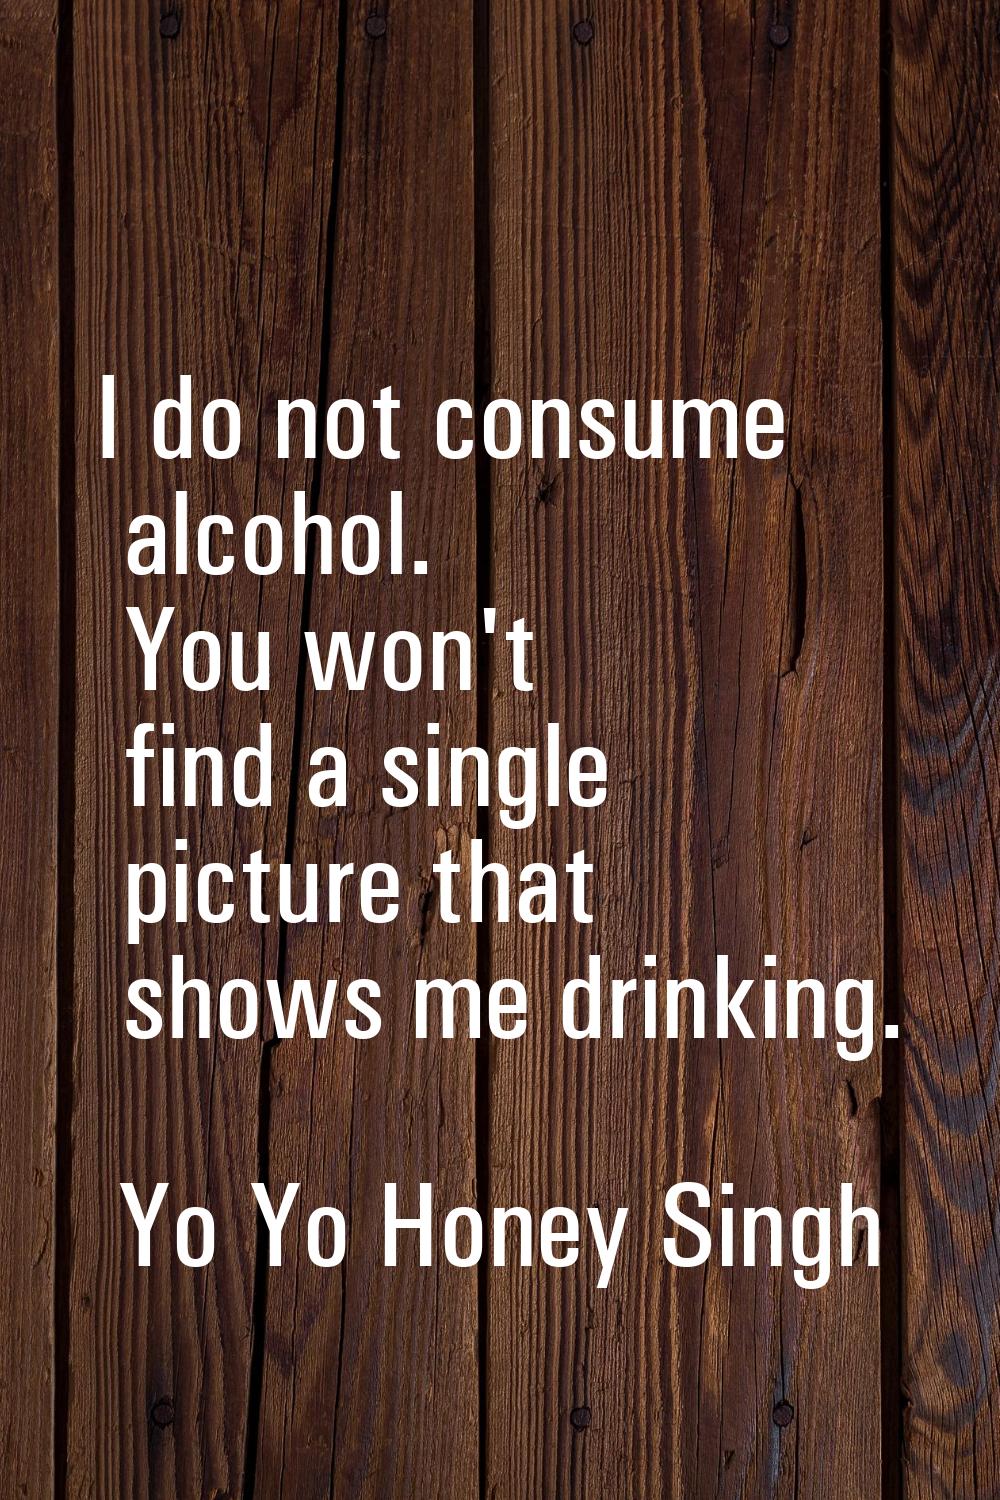 I do not consume alcohol. You won't find a single picture that shows me drinking.